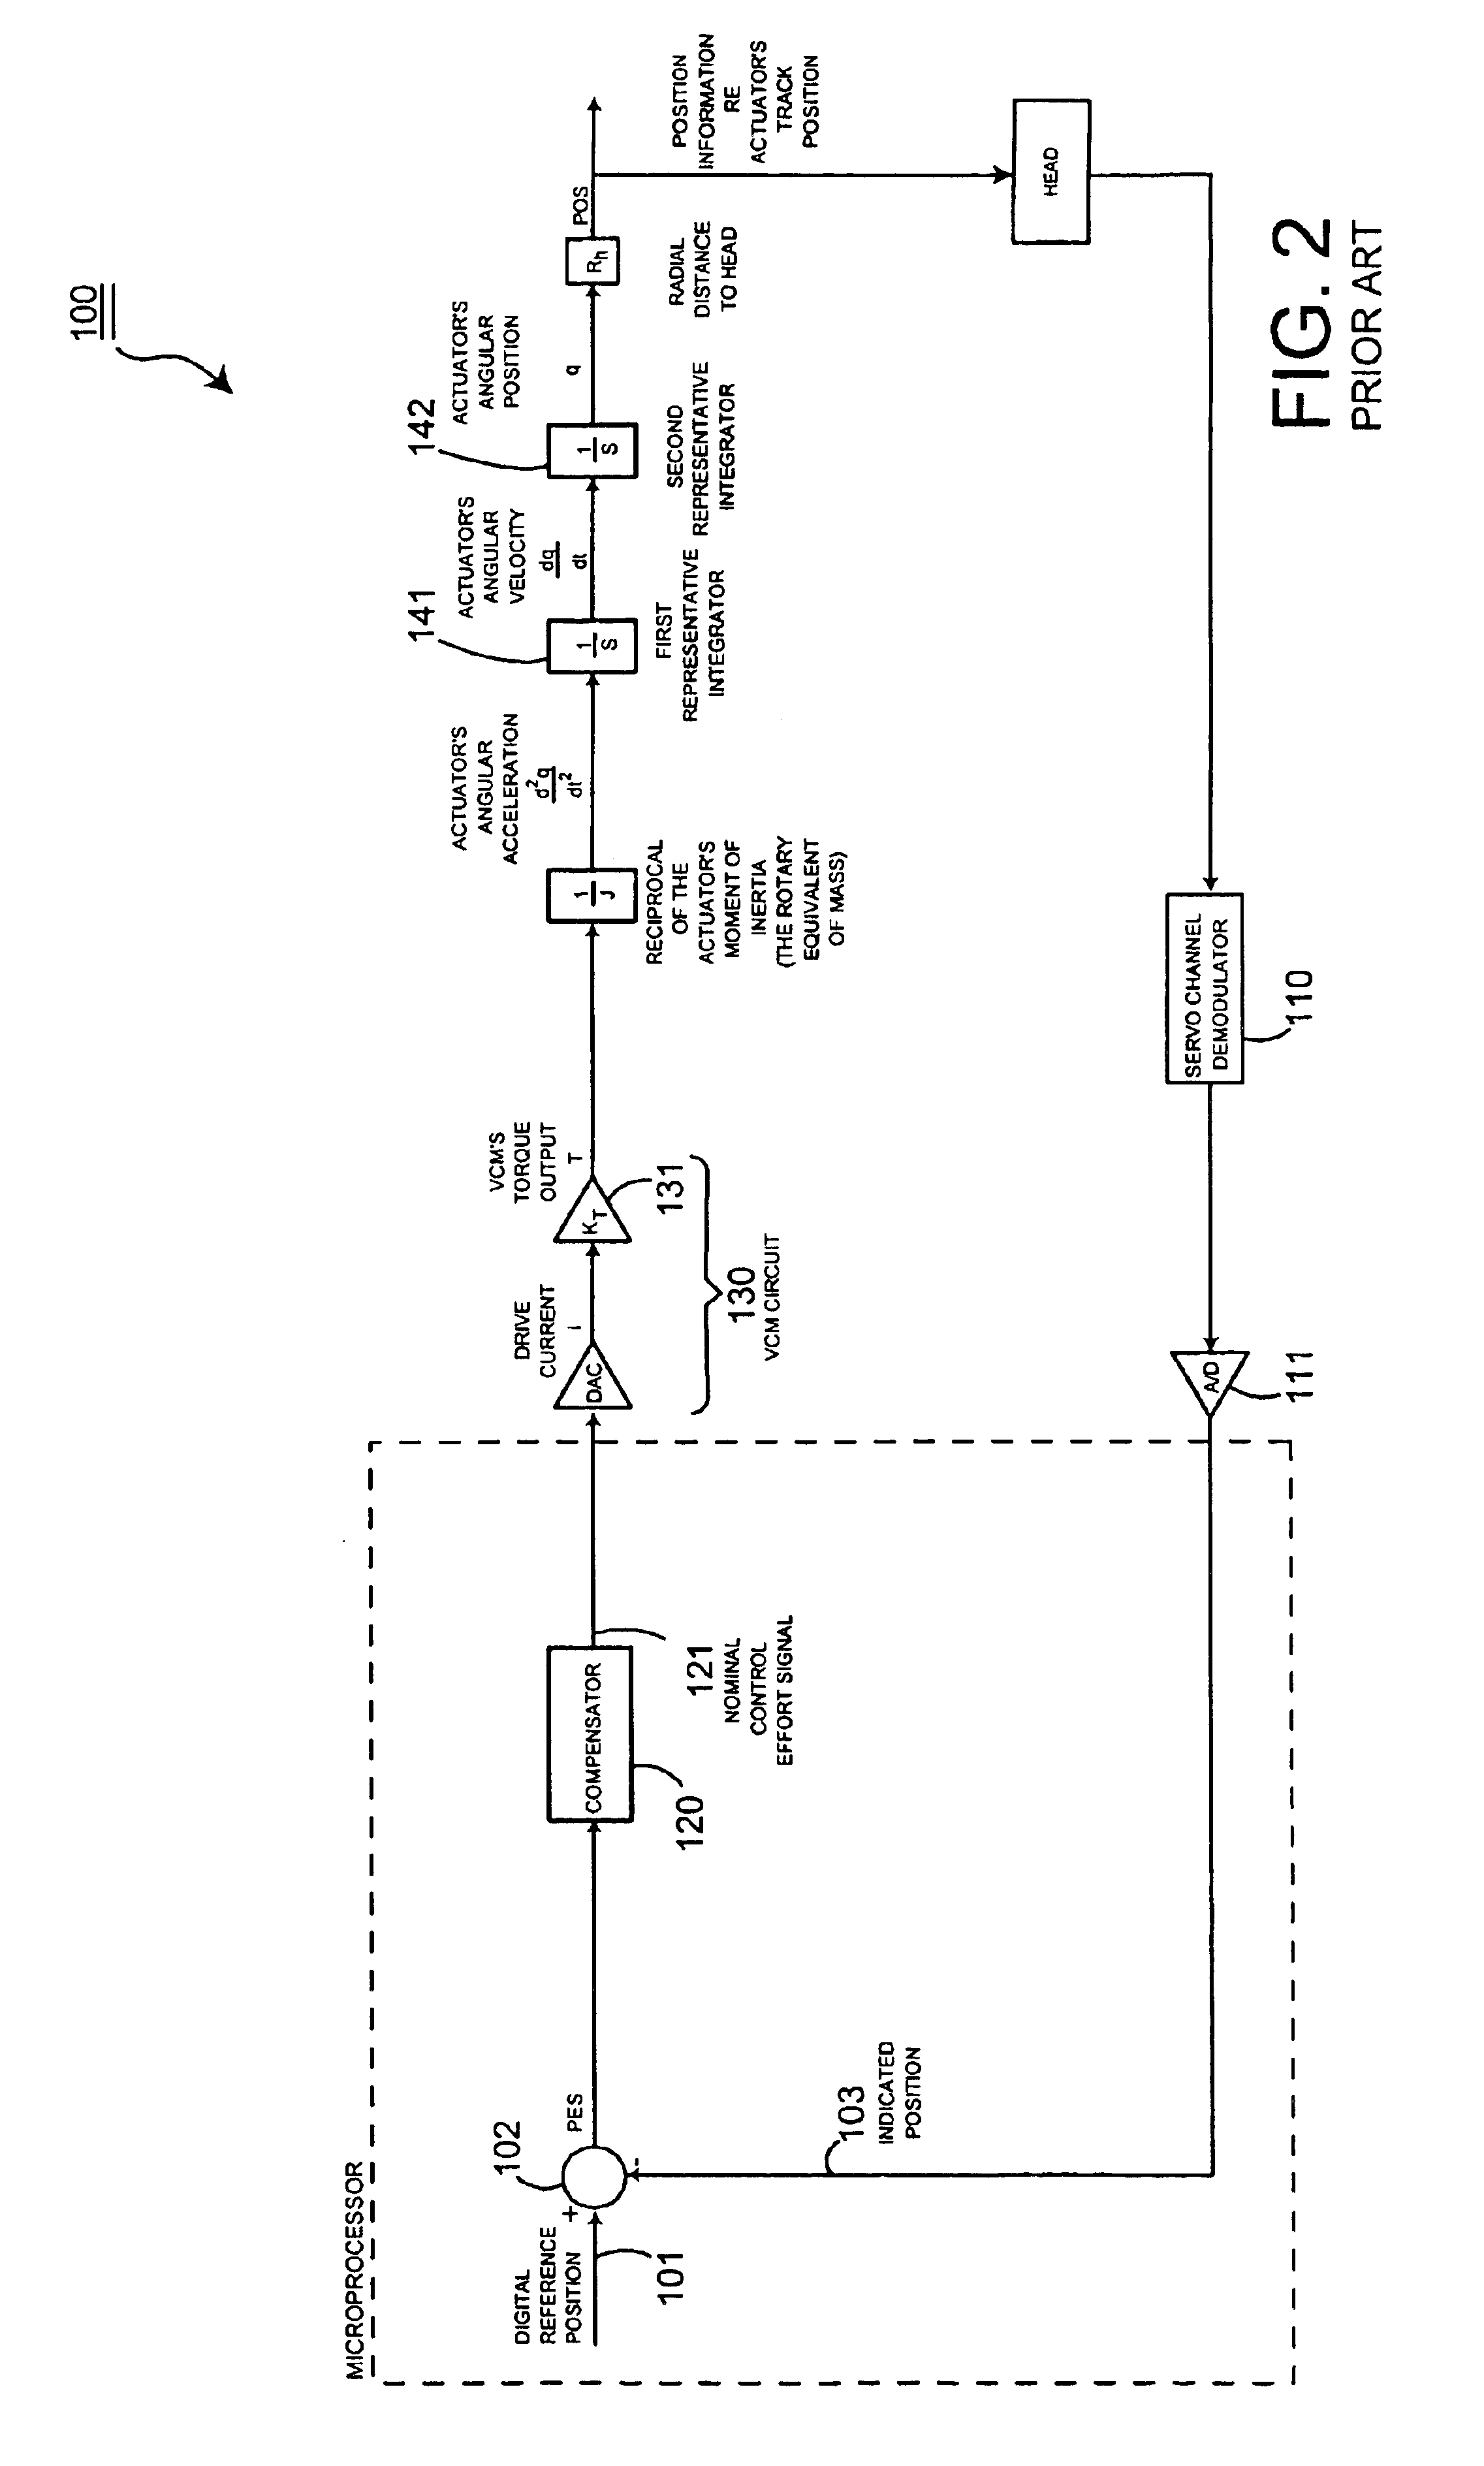 Vibration cancellation in a disk drive by using an acceleration sensor and adaptively adjusting its gain to minimize external acceleration effects